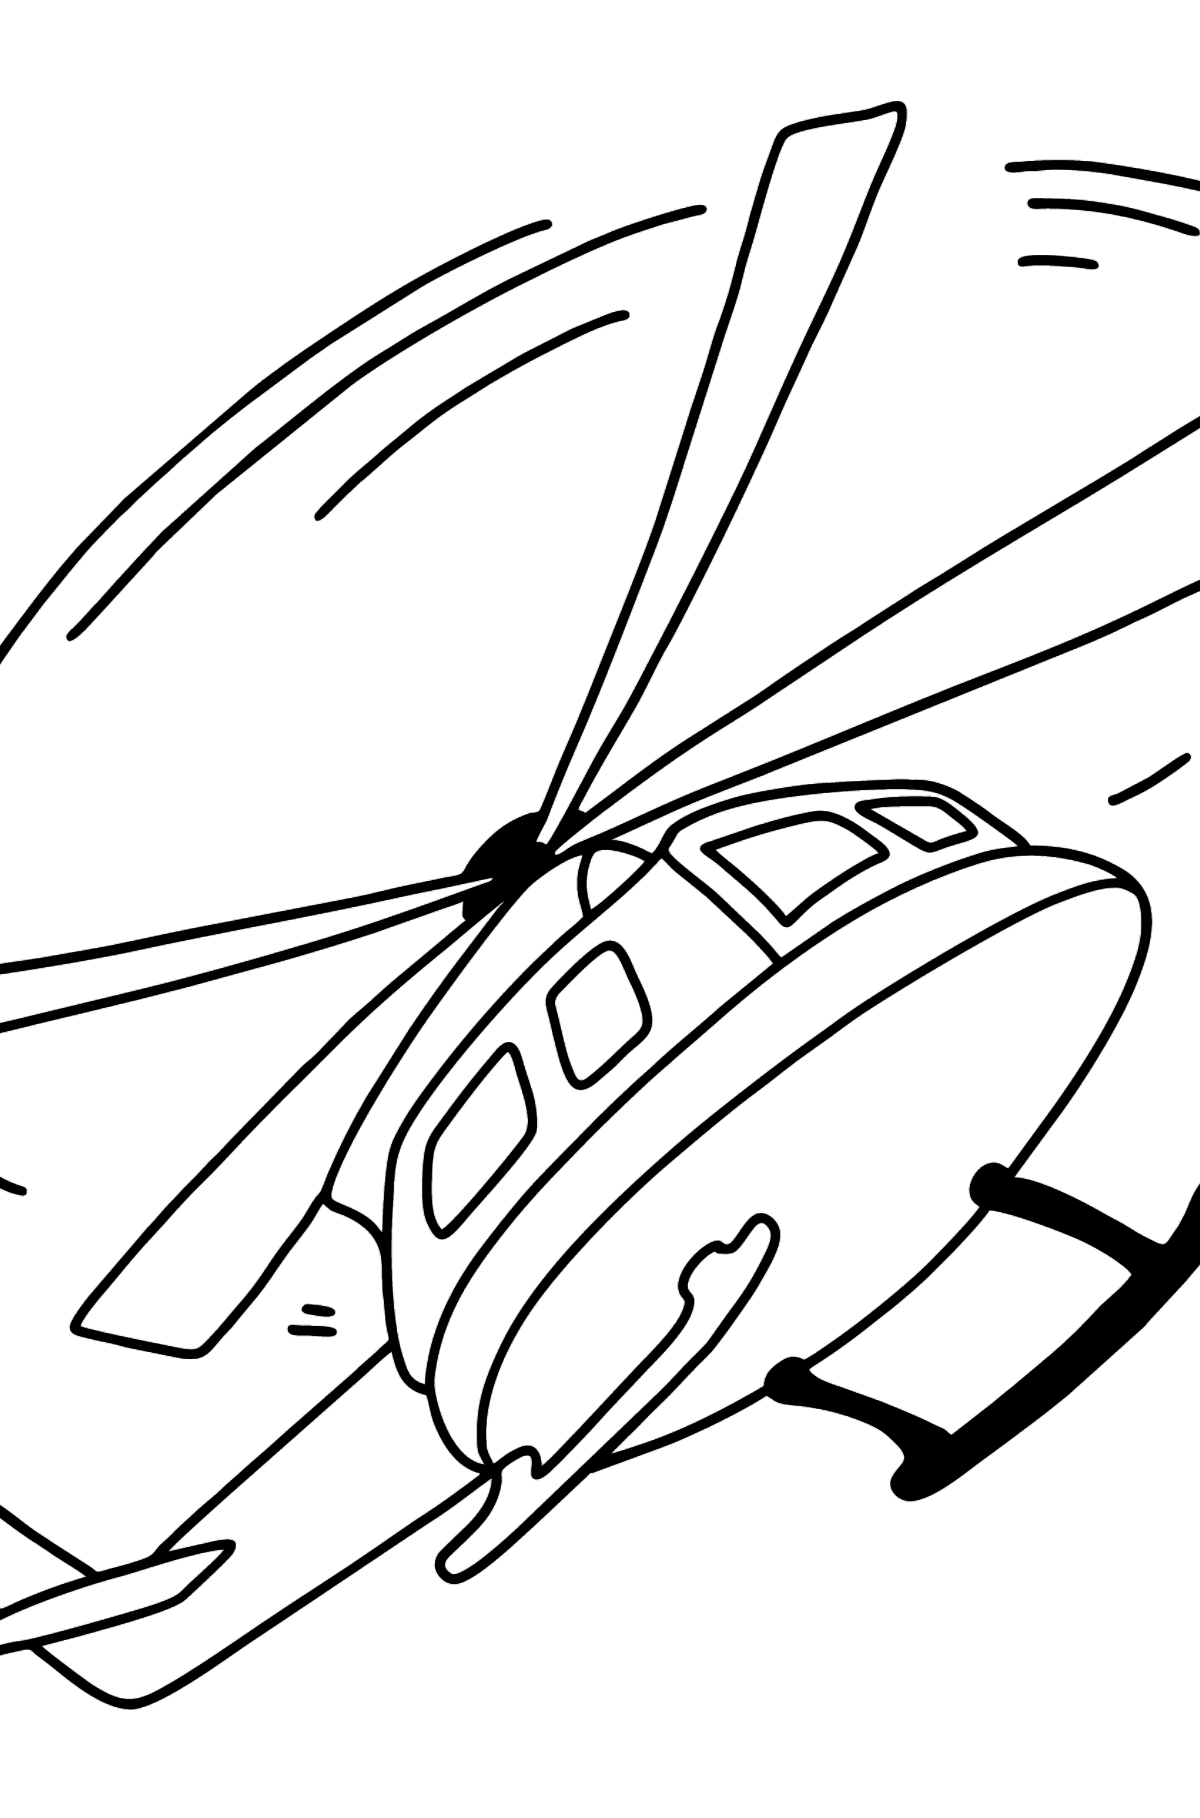 Helicopter coloring page online - Coloring Pages for Kids